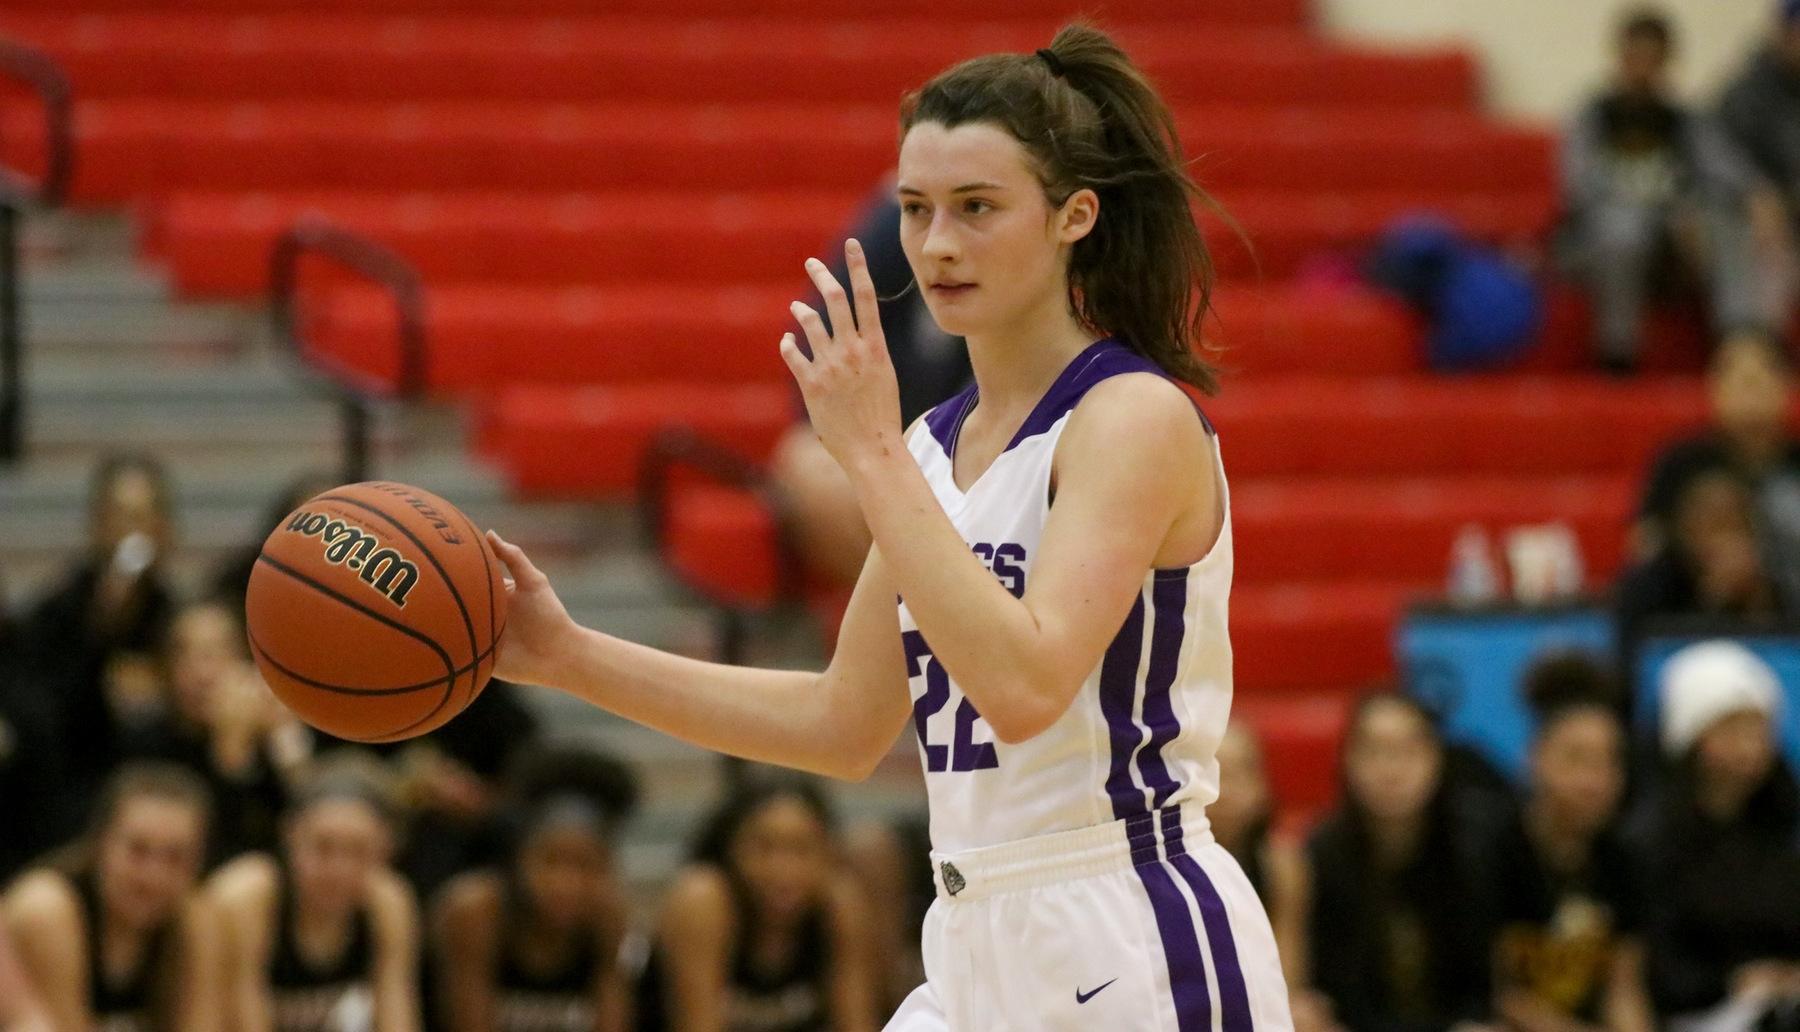 No.11/18 @bhsdogsghoops heads to Decatur Central for IHSAA Regional